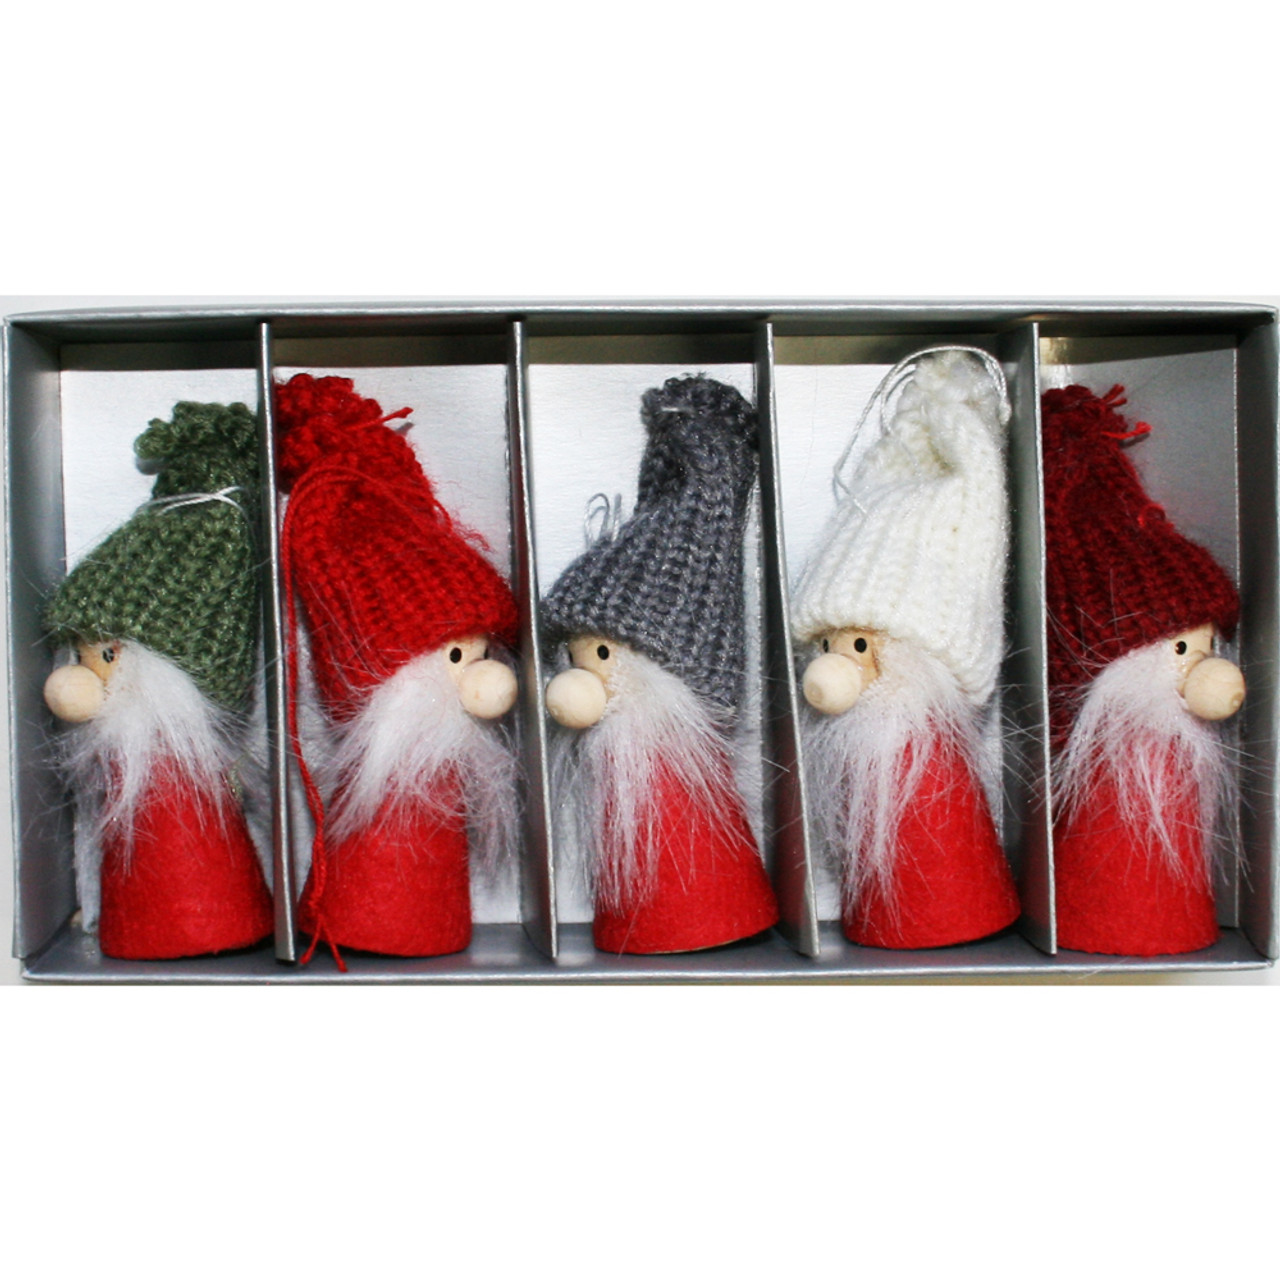 https://cdn11.bigcommerce.com/s-gblv2ntx1h/images/stencil/1280x1280/products/3412/11018/tomte-santa-nordic-gnome-ornaments-5-pack-H1-2108__89646.1503165645.jpg?c=2